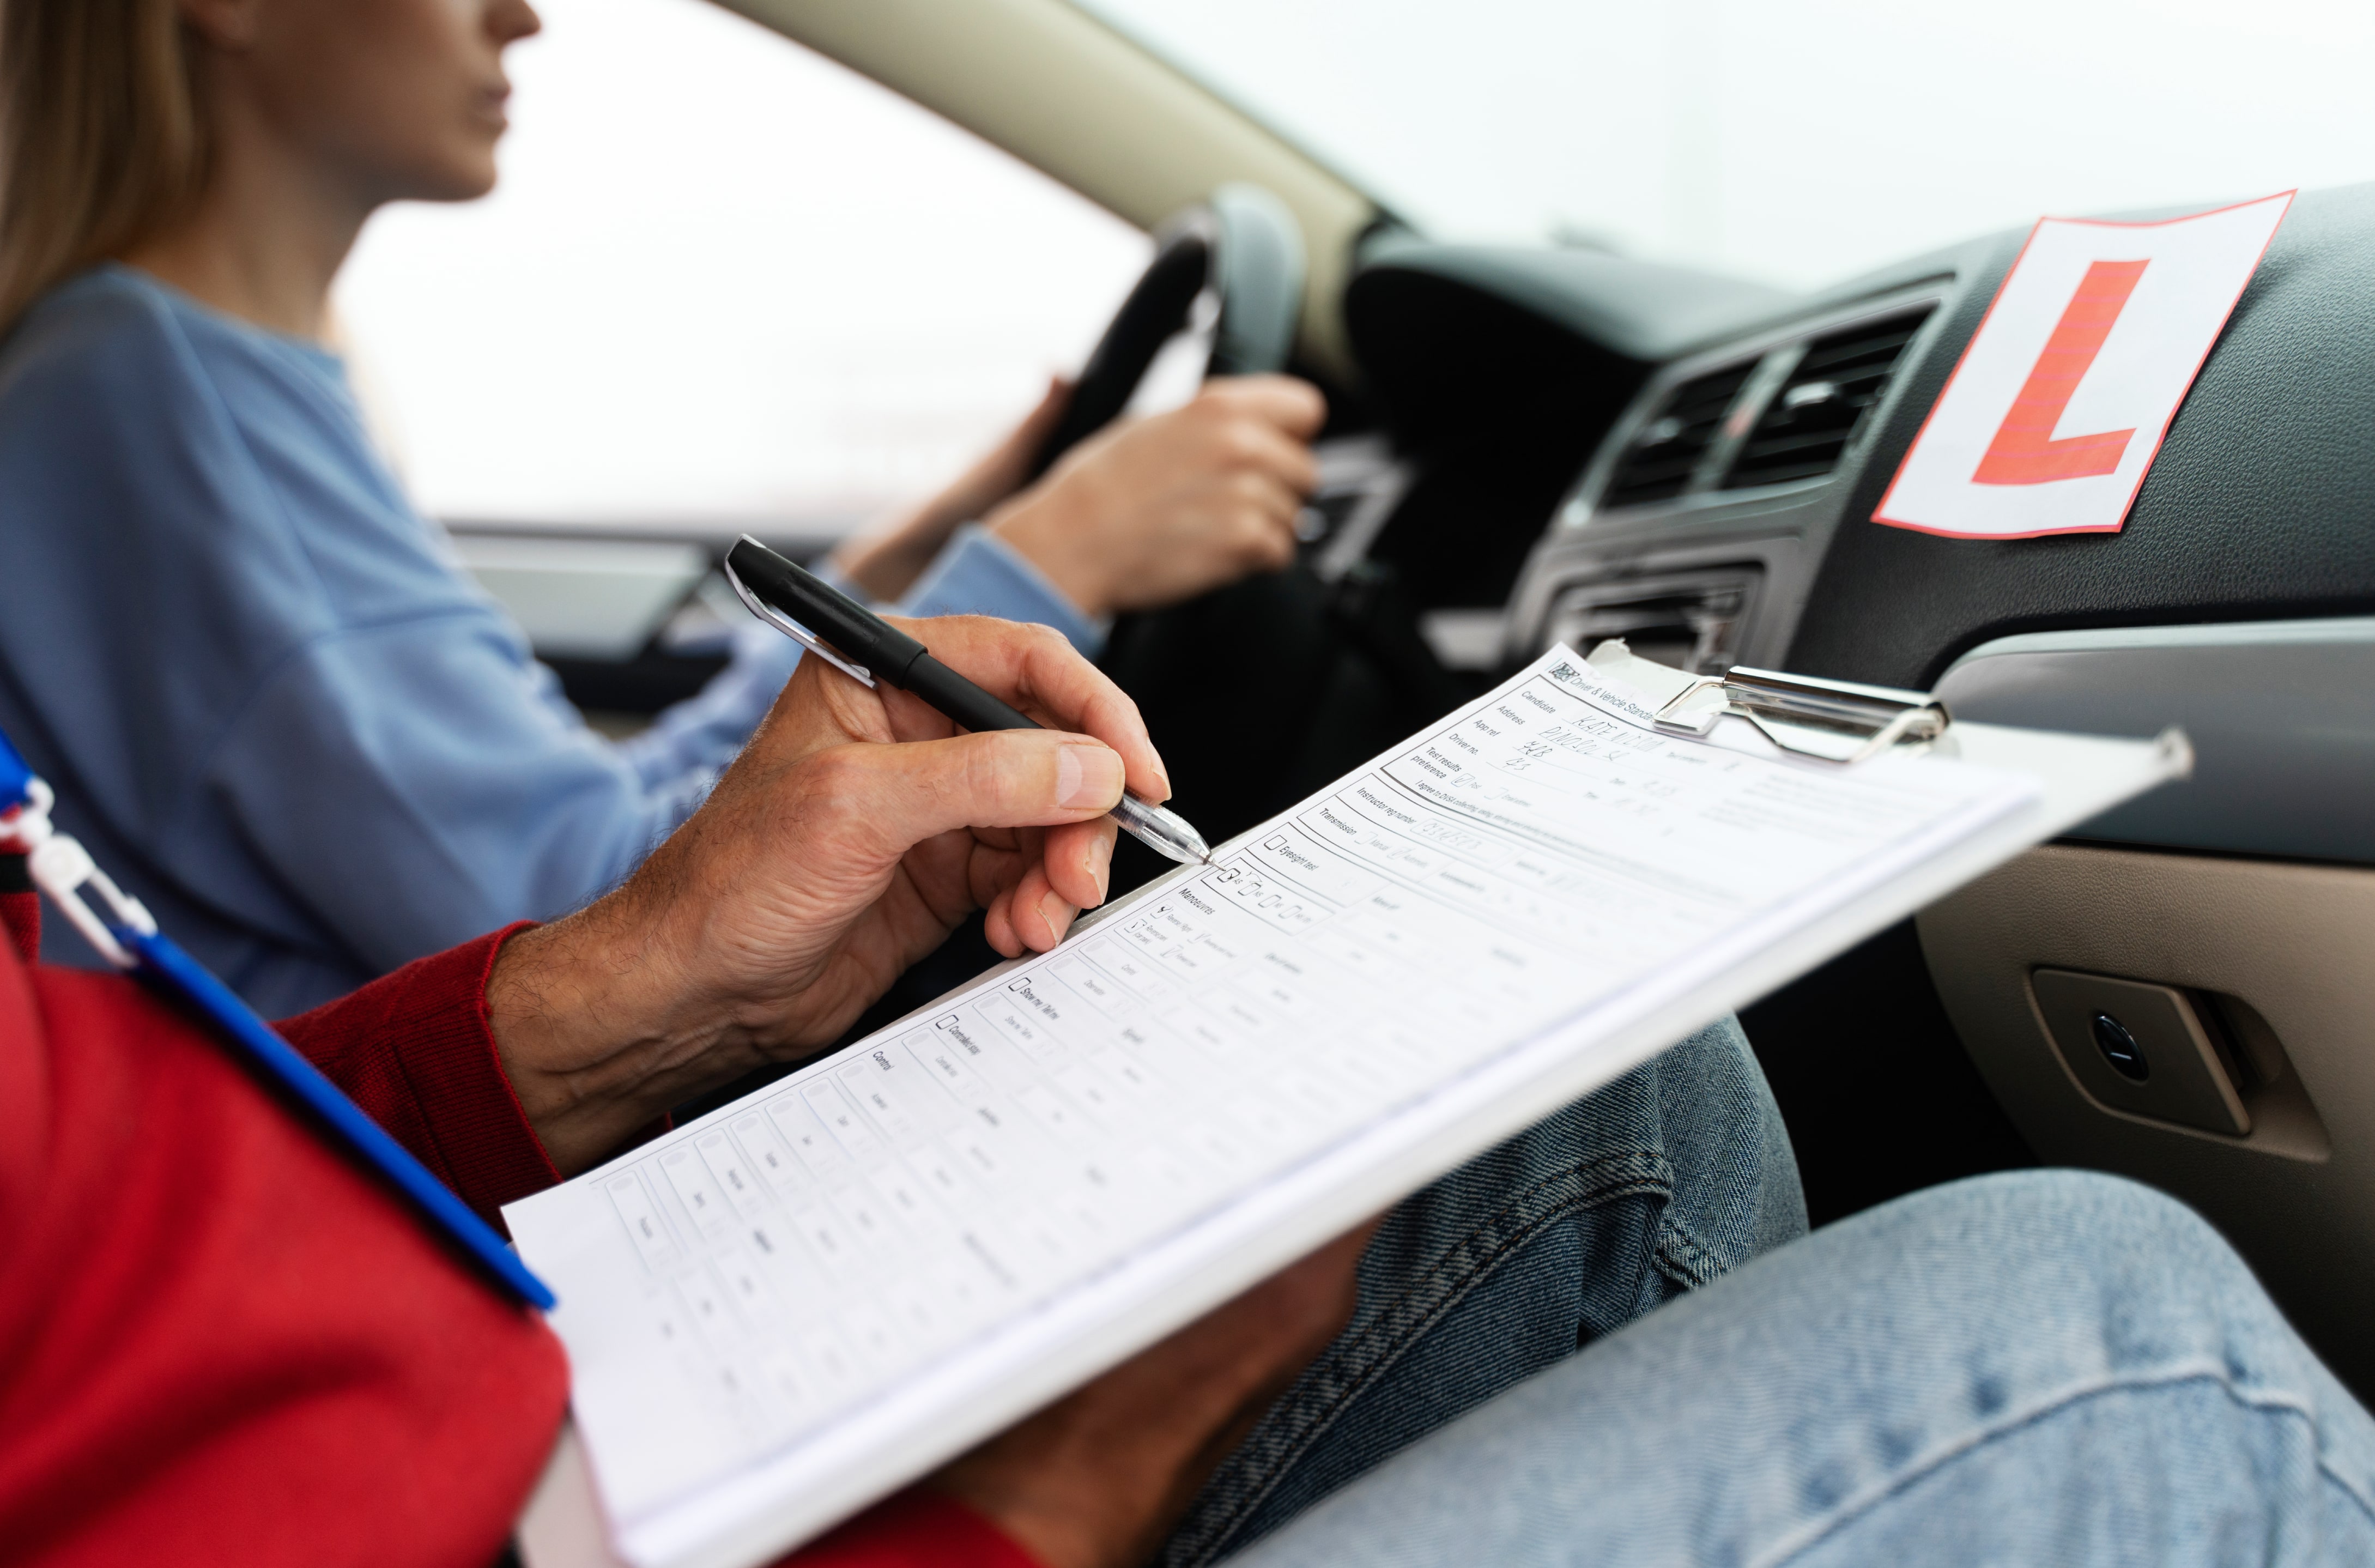 Saras Case Study on Driving Test Agency